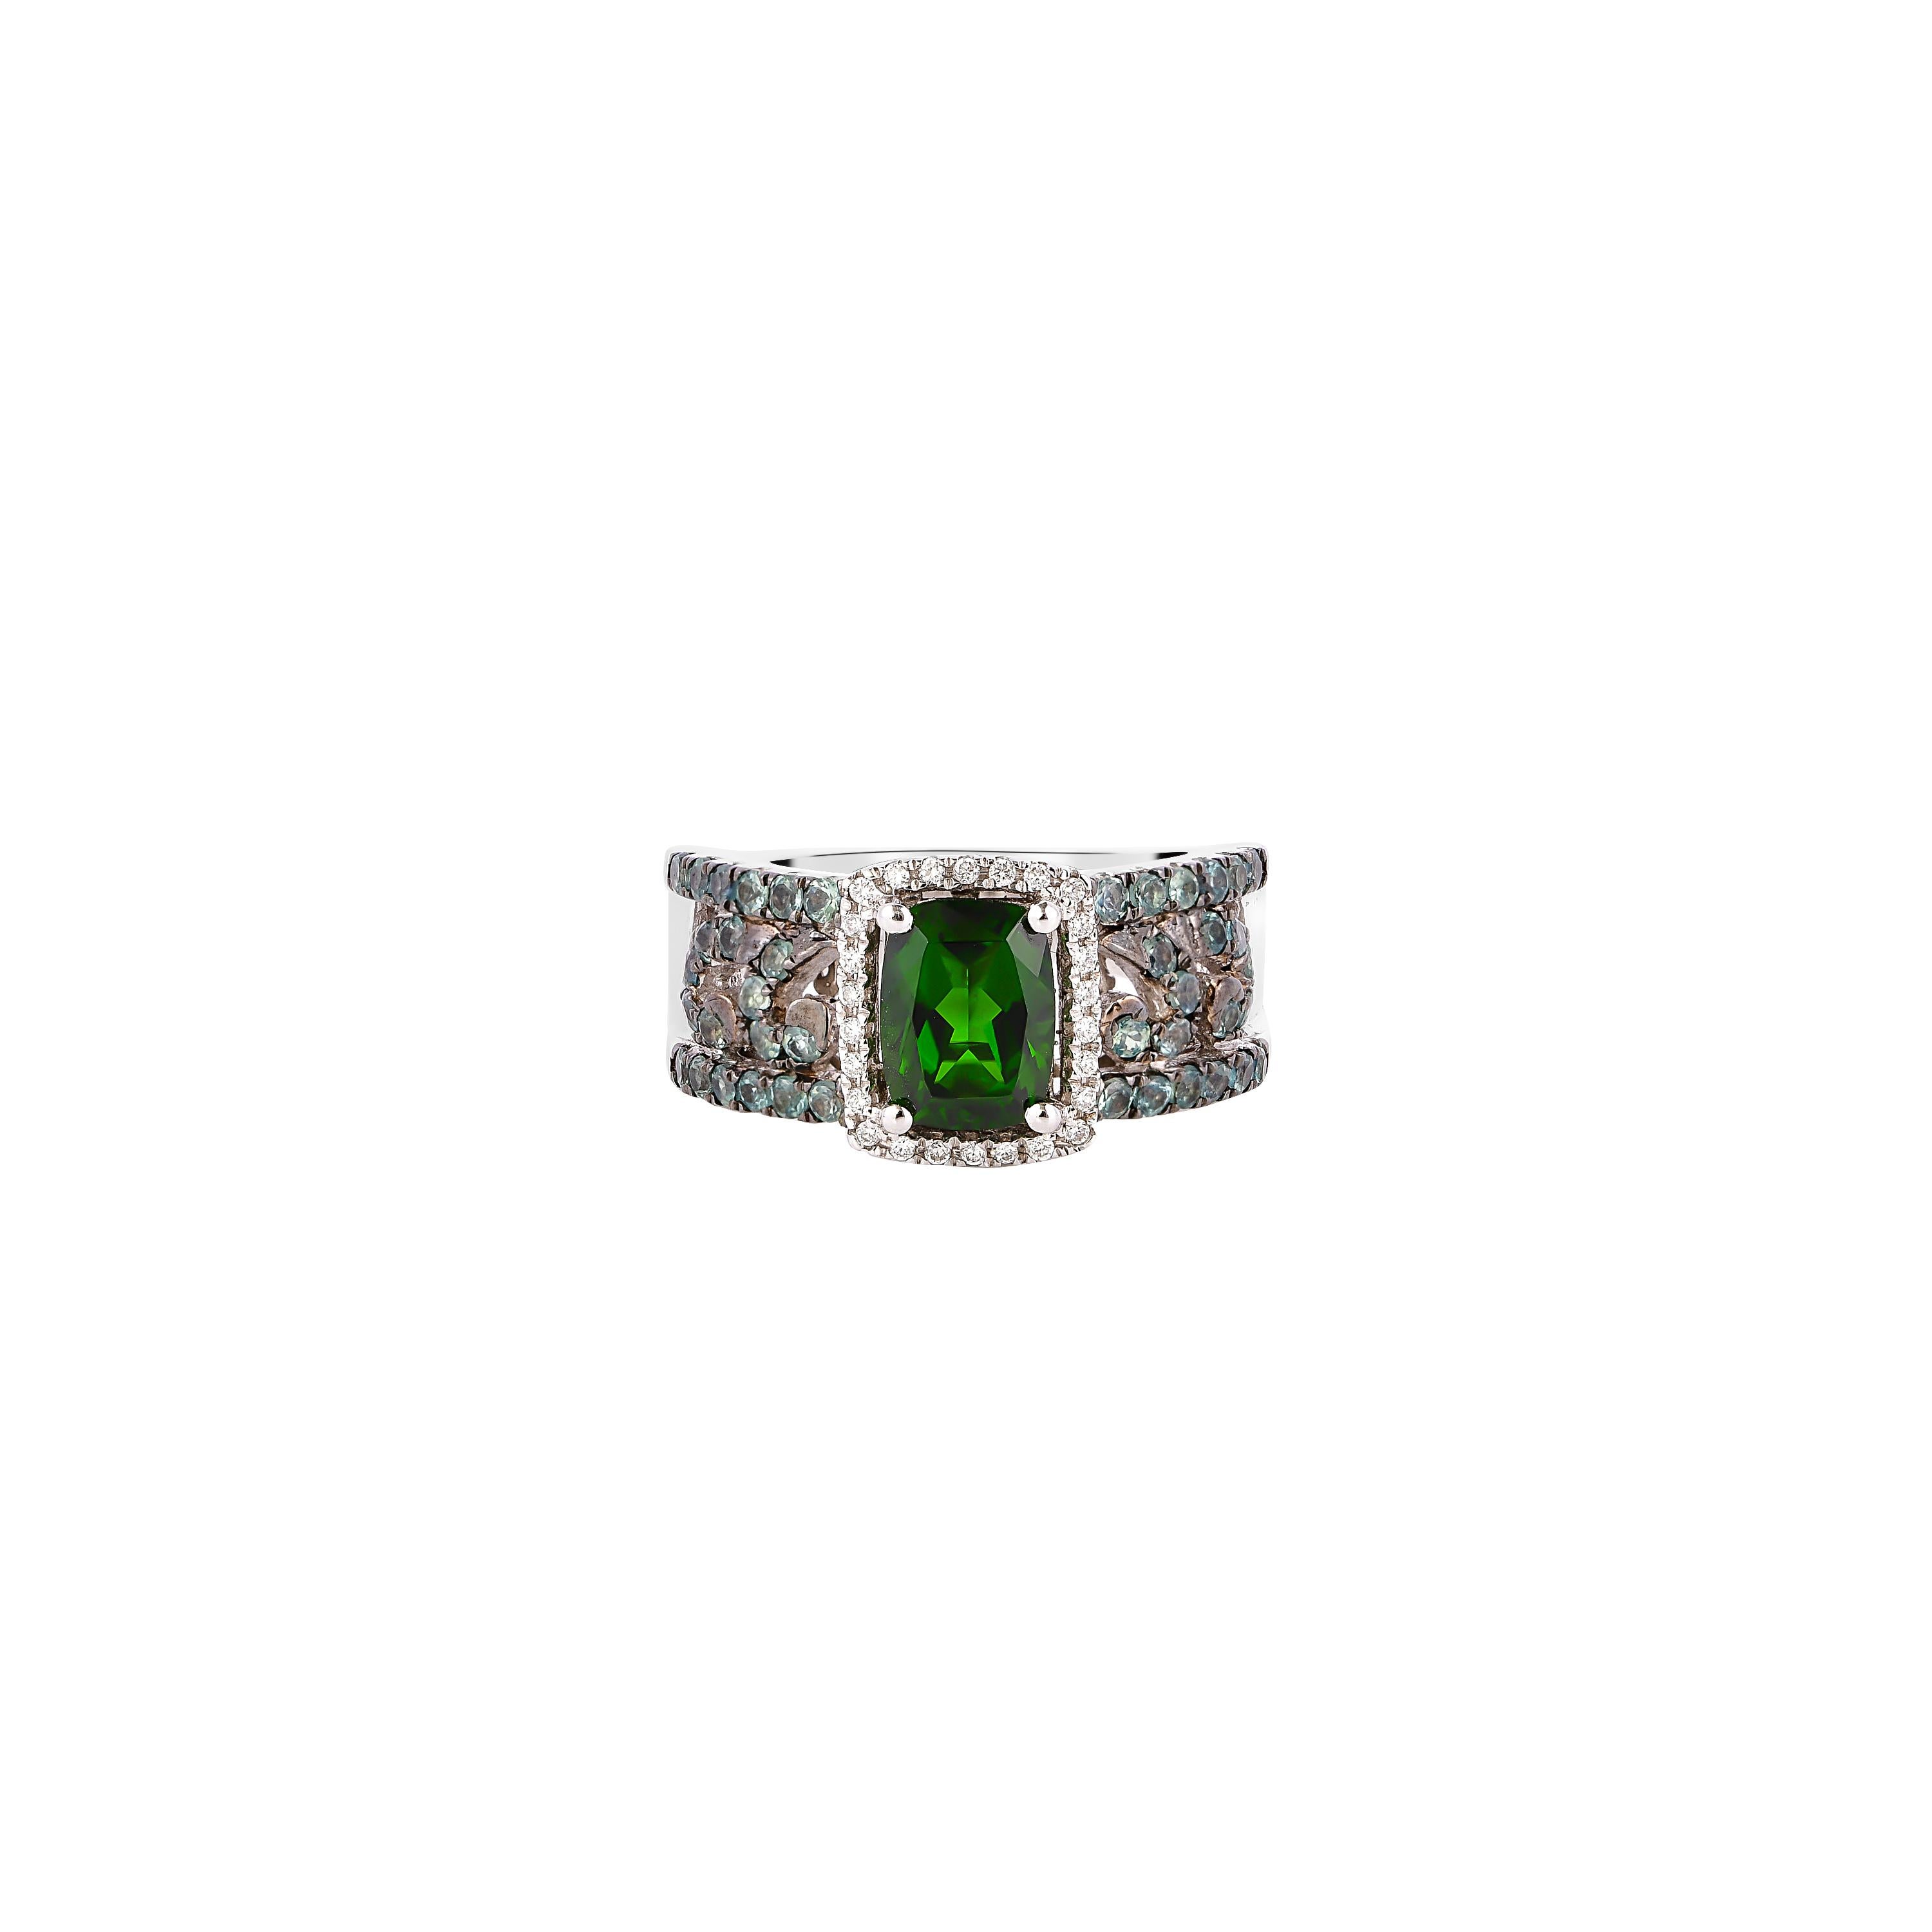 Cushion Cut 1.50 Carat Chrome Diopside Ring in 14 Karat White Gold For Sale